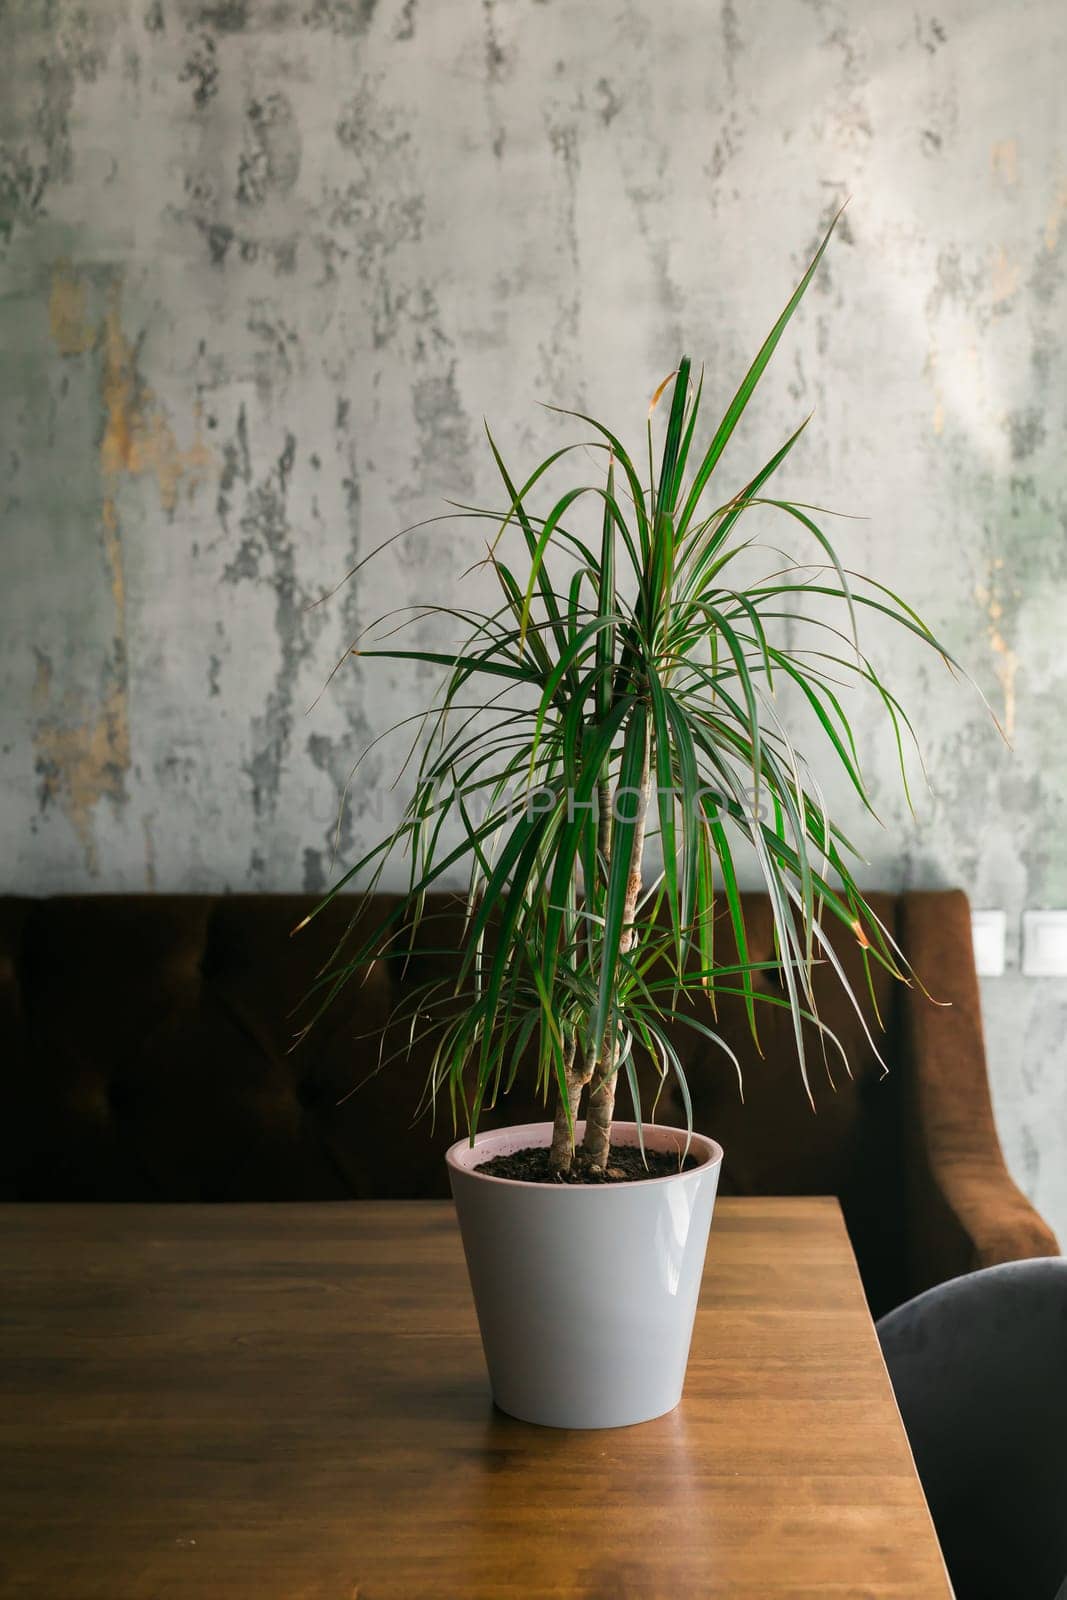 Room or restaurant decoration with a plant in pot